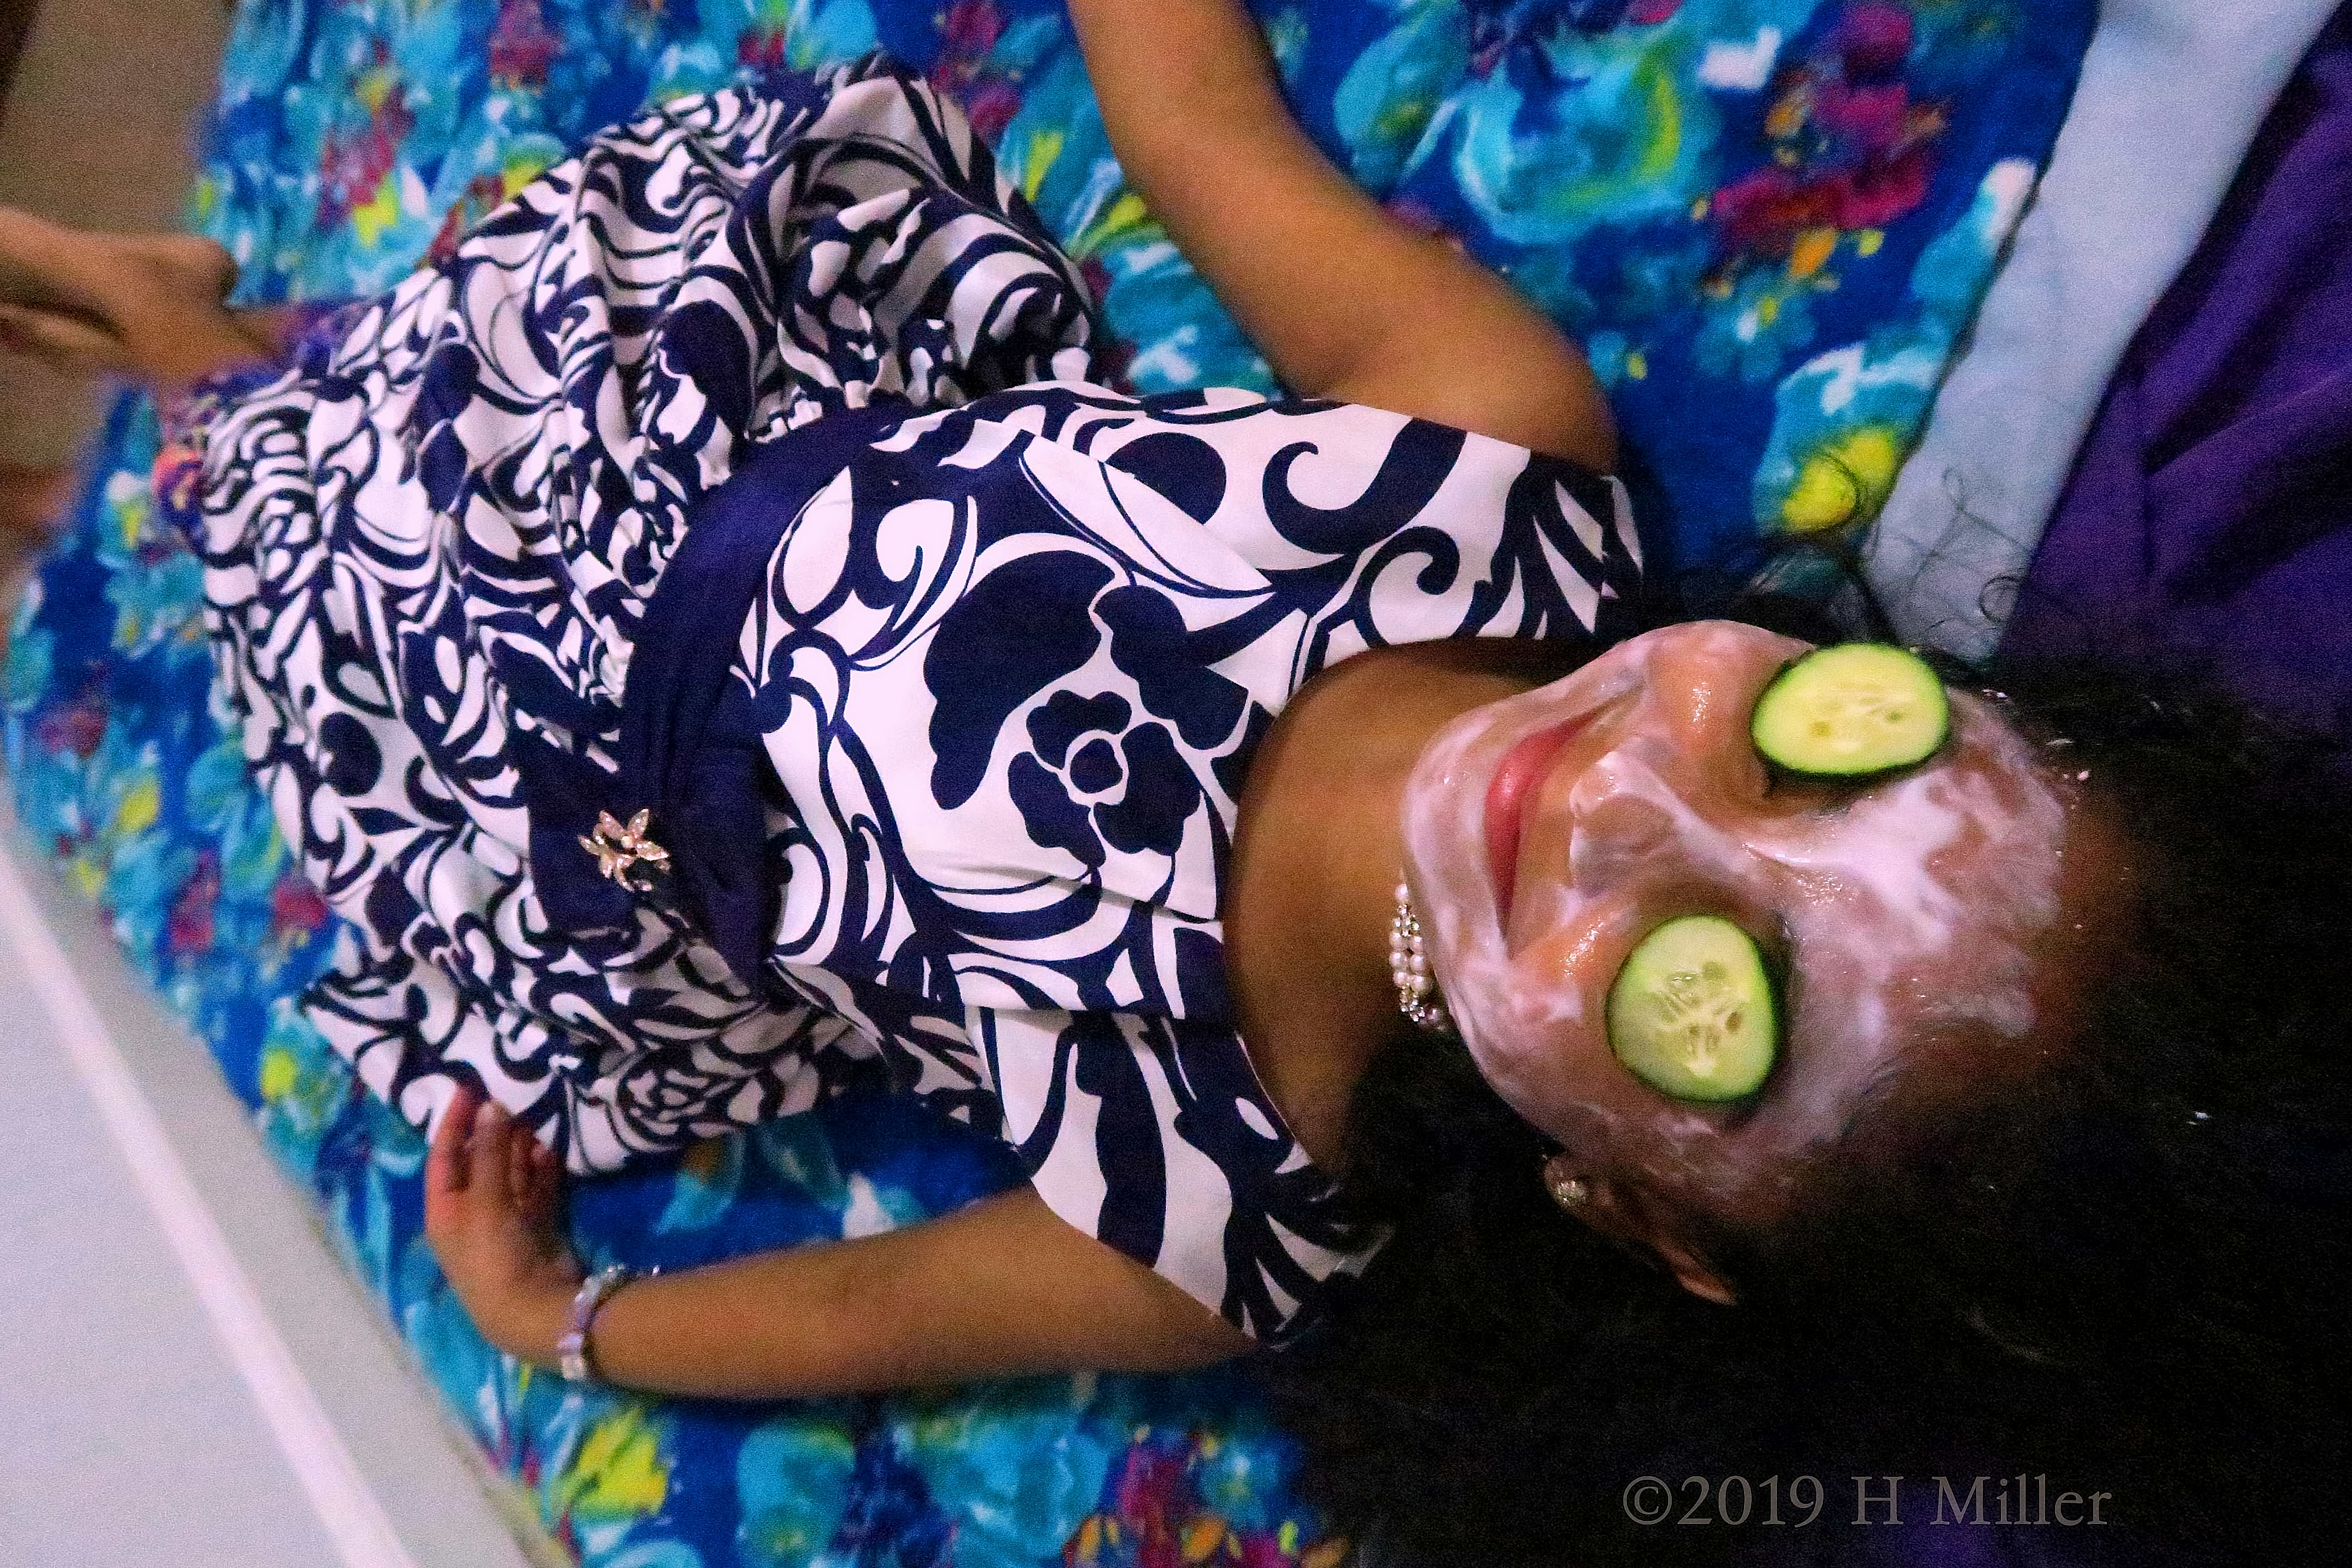 Smiling During Girls Facials. She Is Happy With Cukes On Her Eyes! 